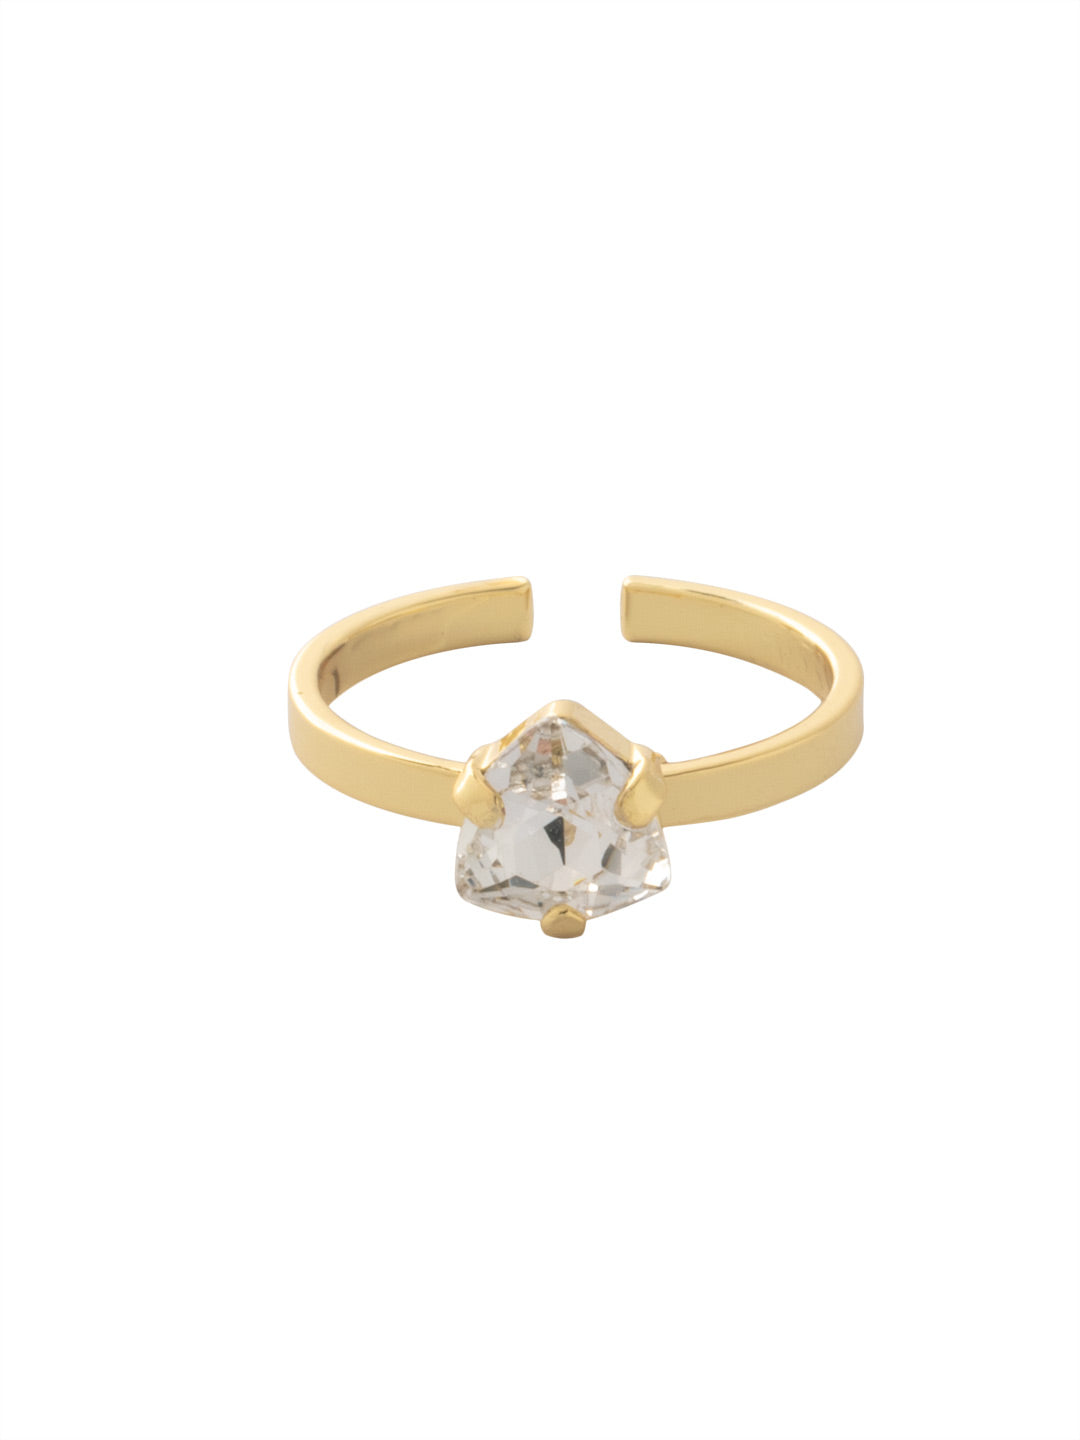 Sedge Band Ring - RFM5BGCRY - <p>The Sedge Band Ring features a single trillion cut crystal on an adjustable band. From Sorrelli's Crystal collection in our Bright Gold-tone finish.</p>